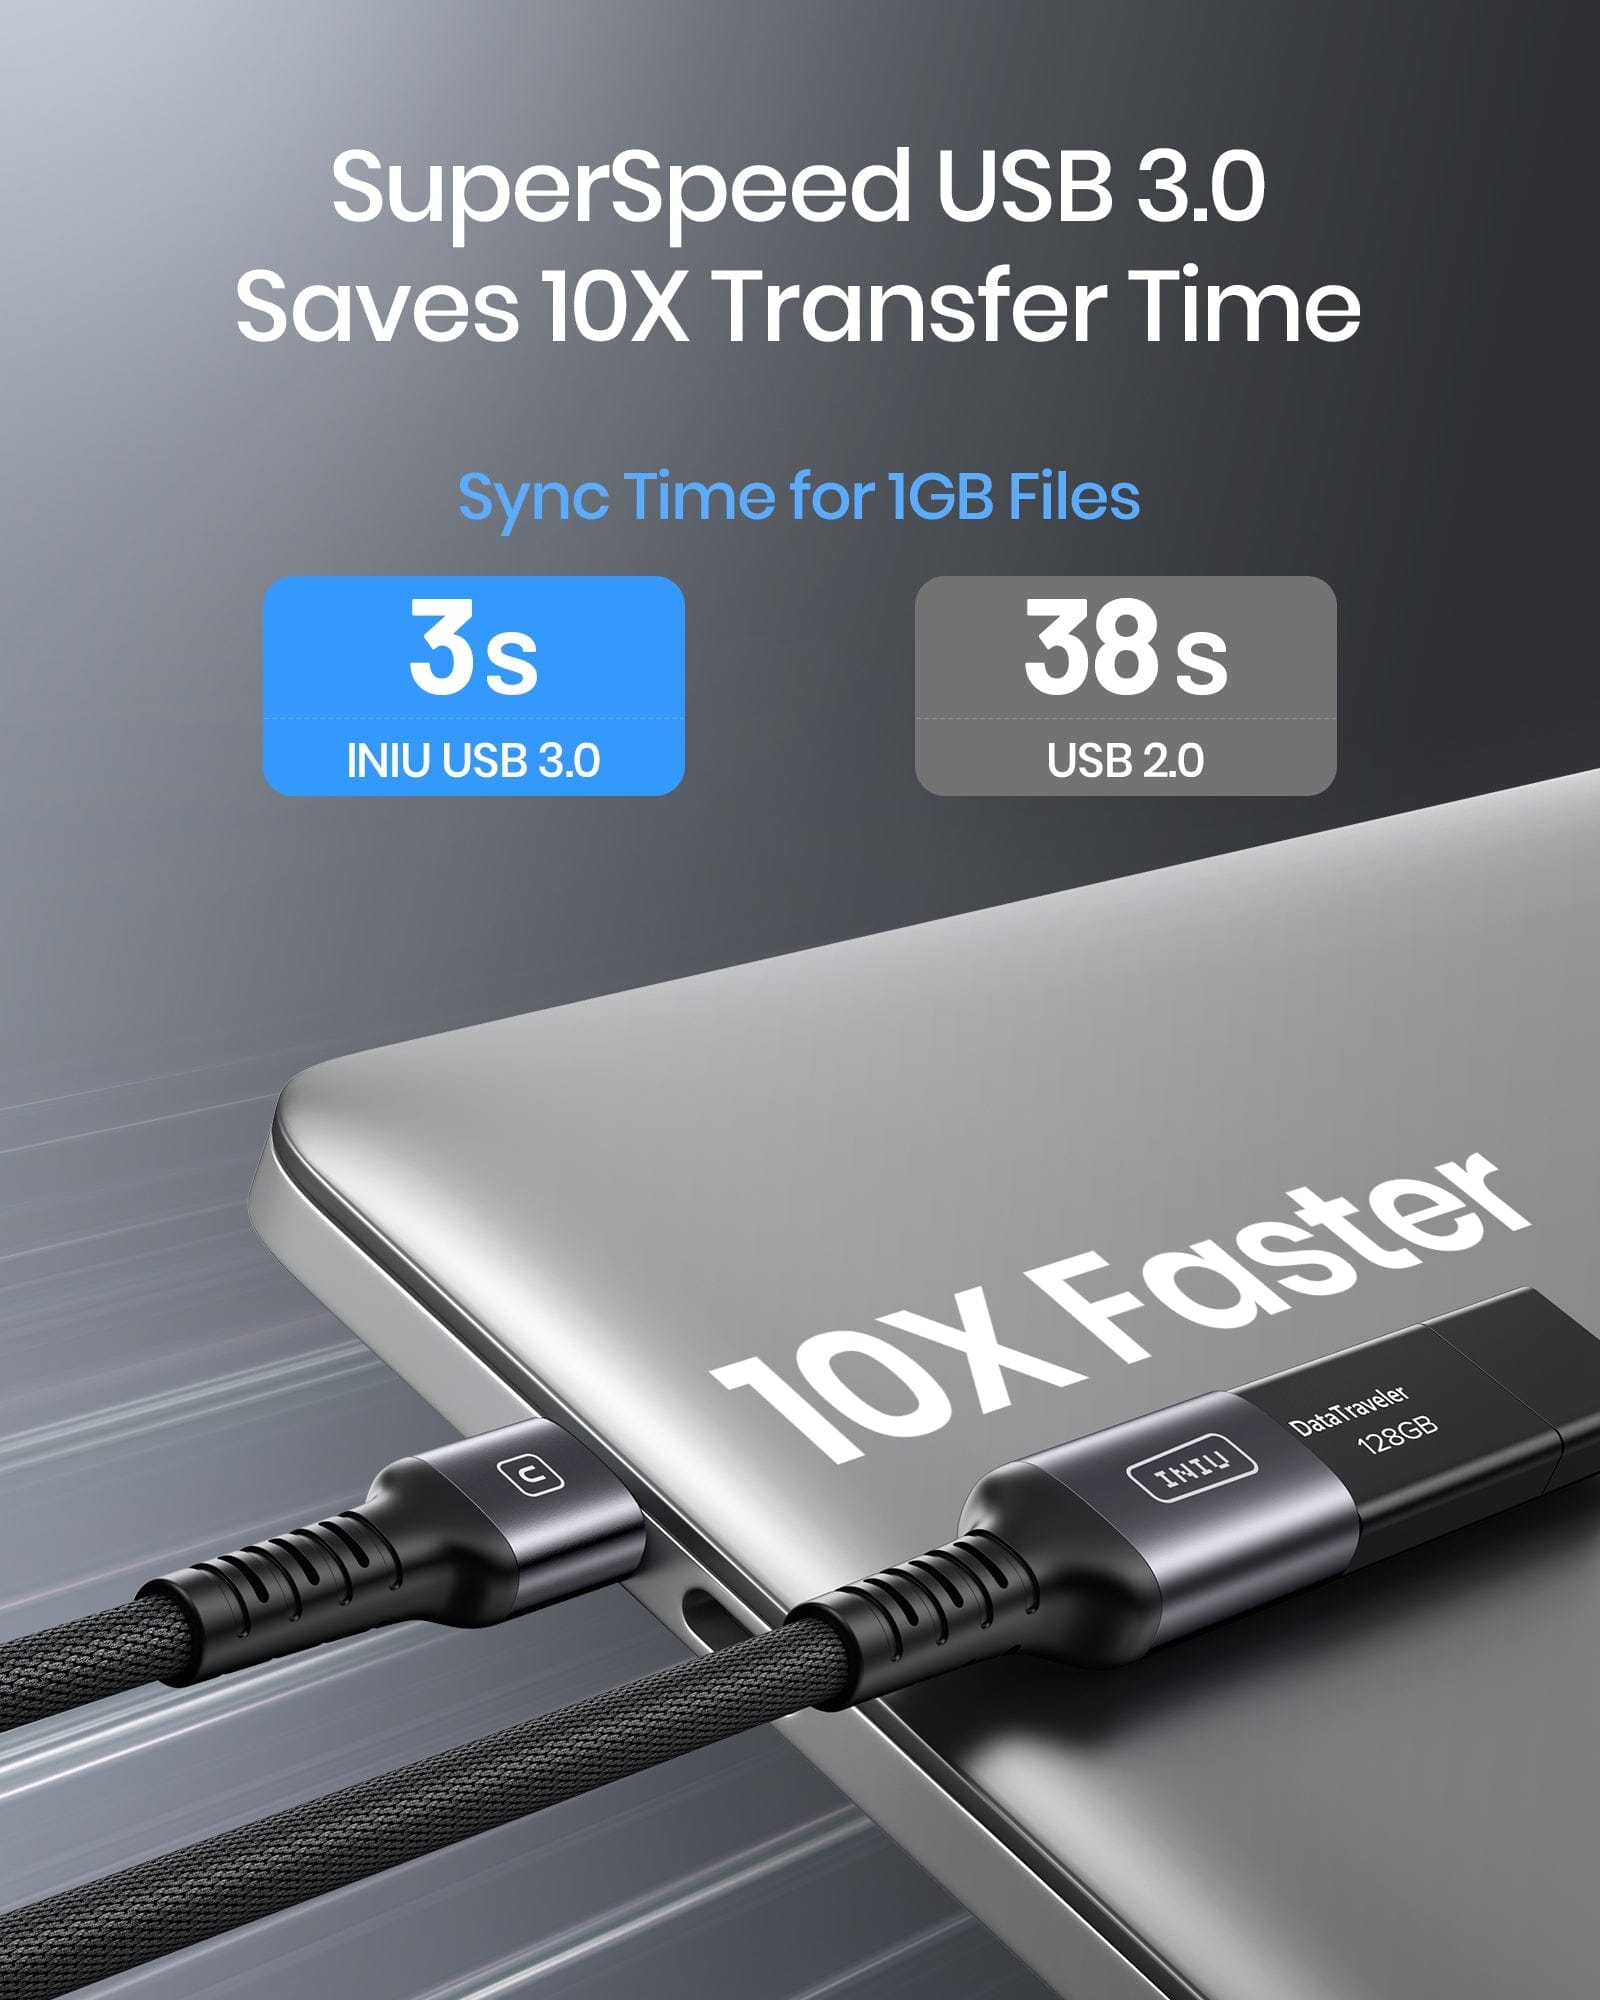 SuperSpeed USB 3.0 Saves 10X Transfer Time